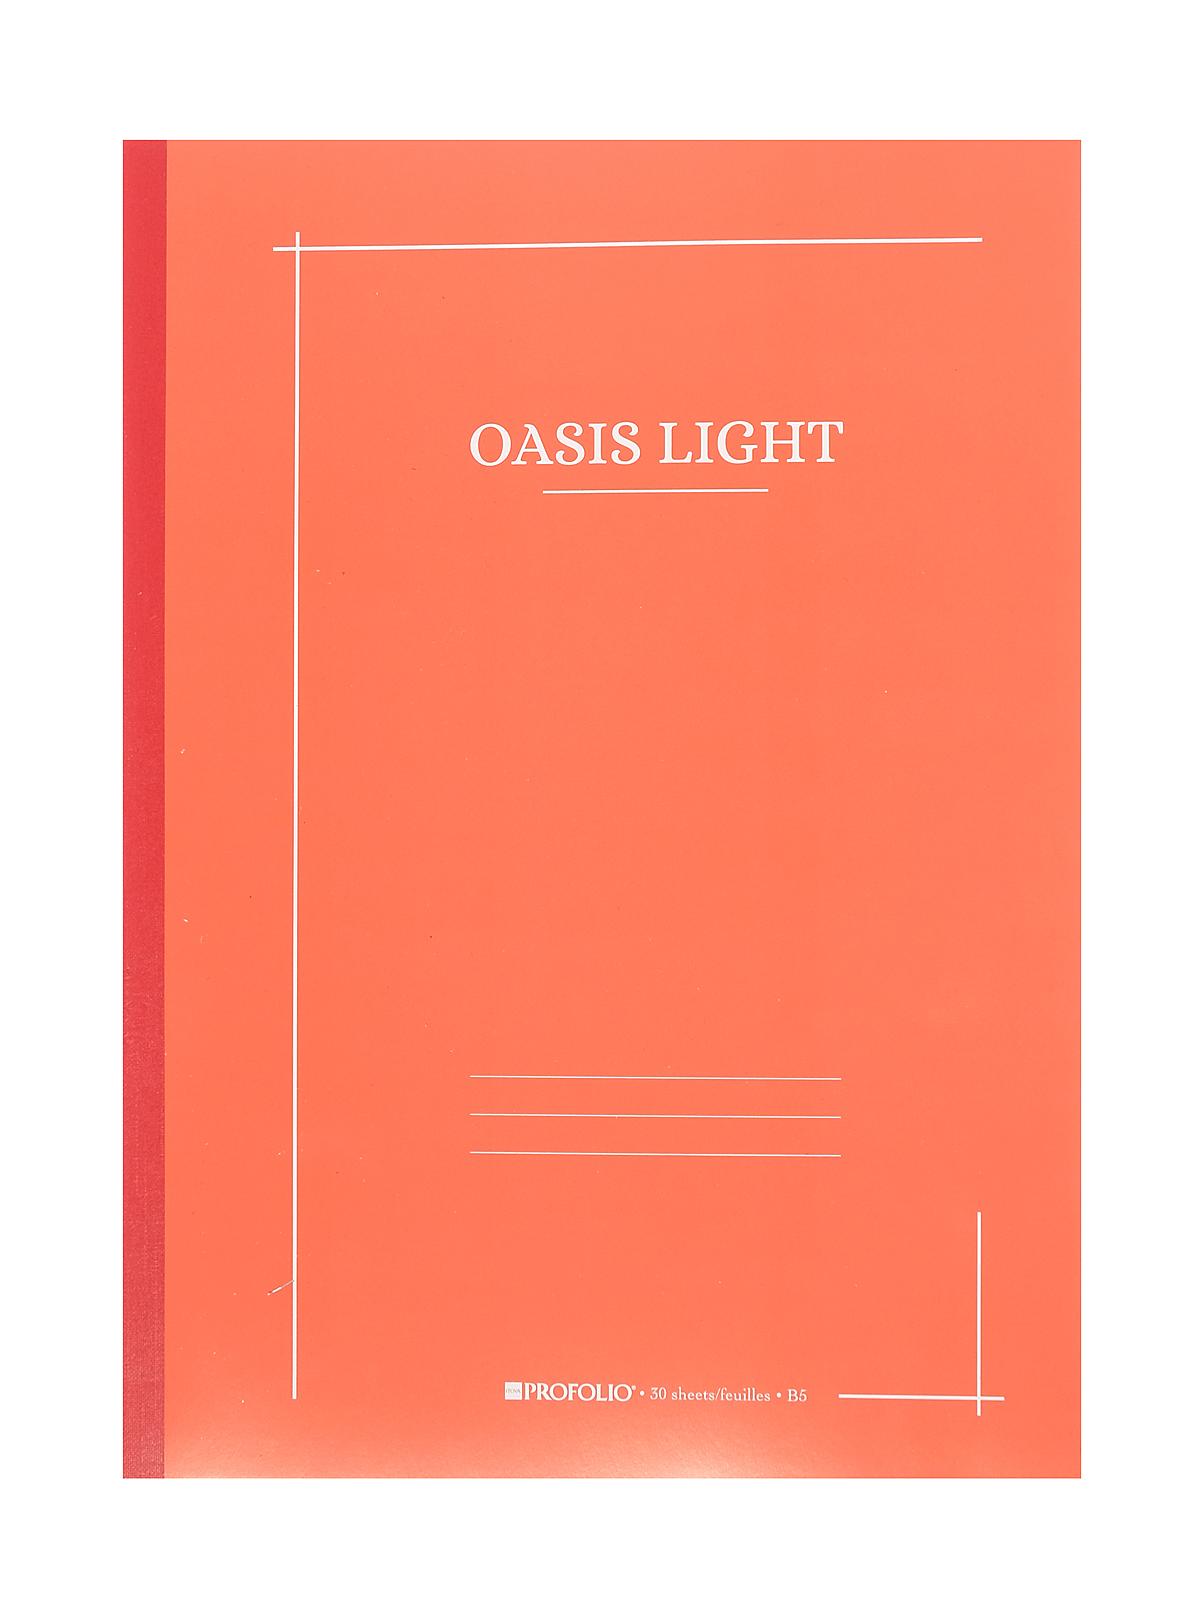 Profolio Oasis Light Notebooks 7 In. X 9.9 In. Tomato 30 Pages